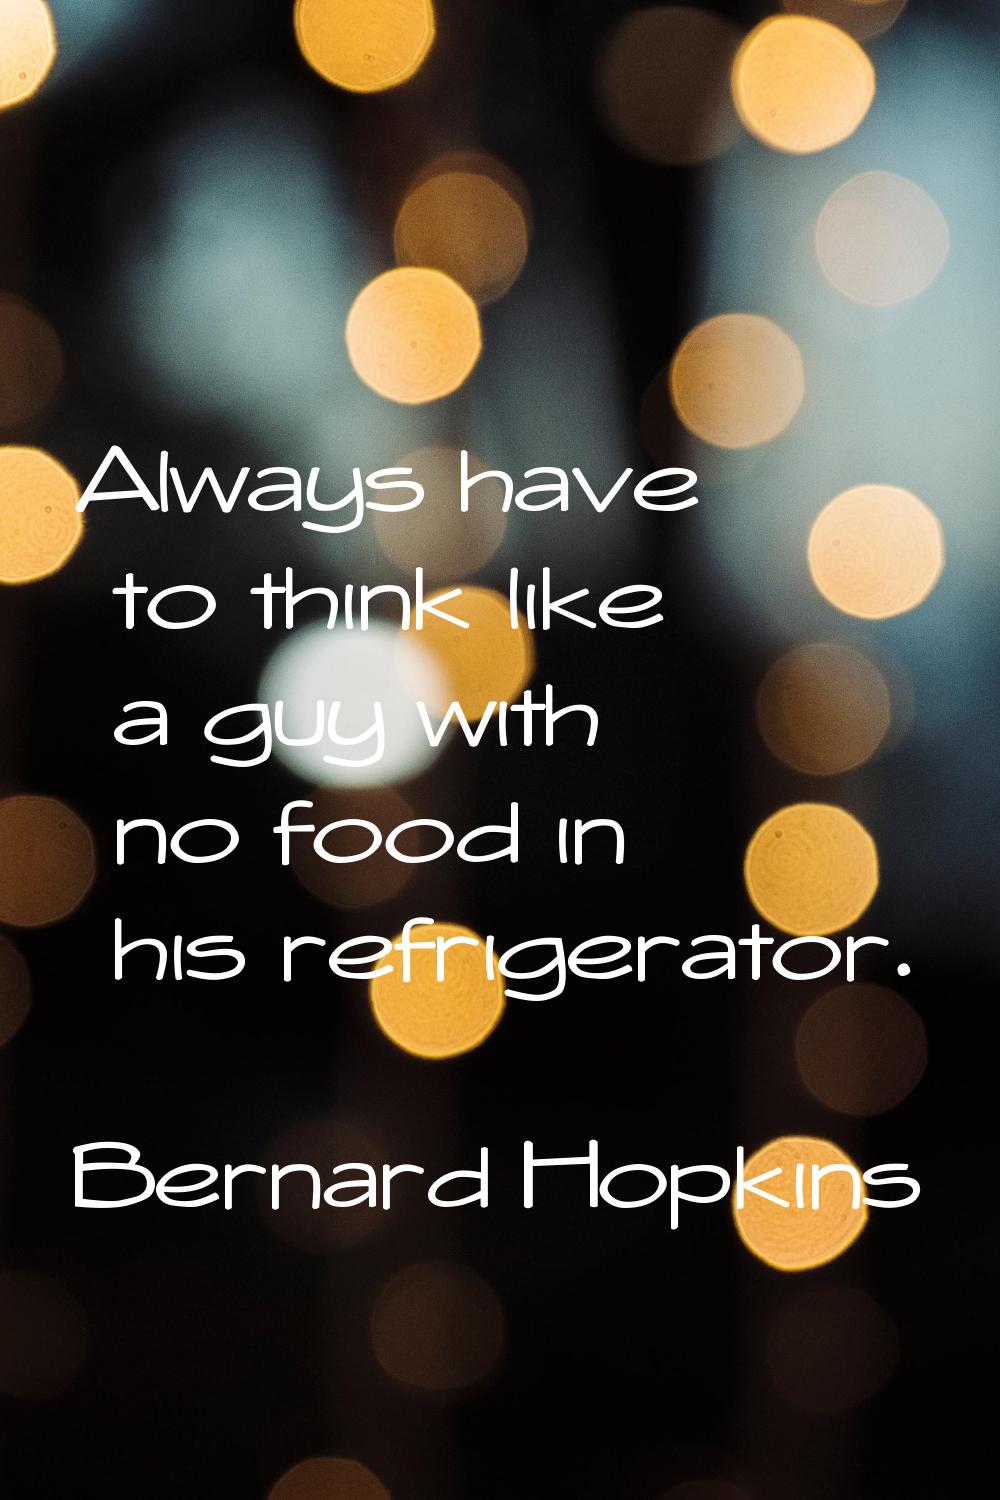 Always have to think like a guy with no food in his refrigerator.